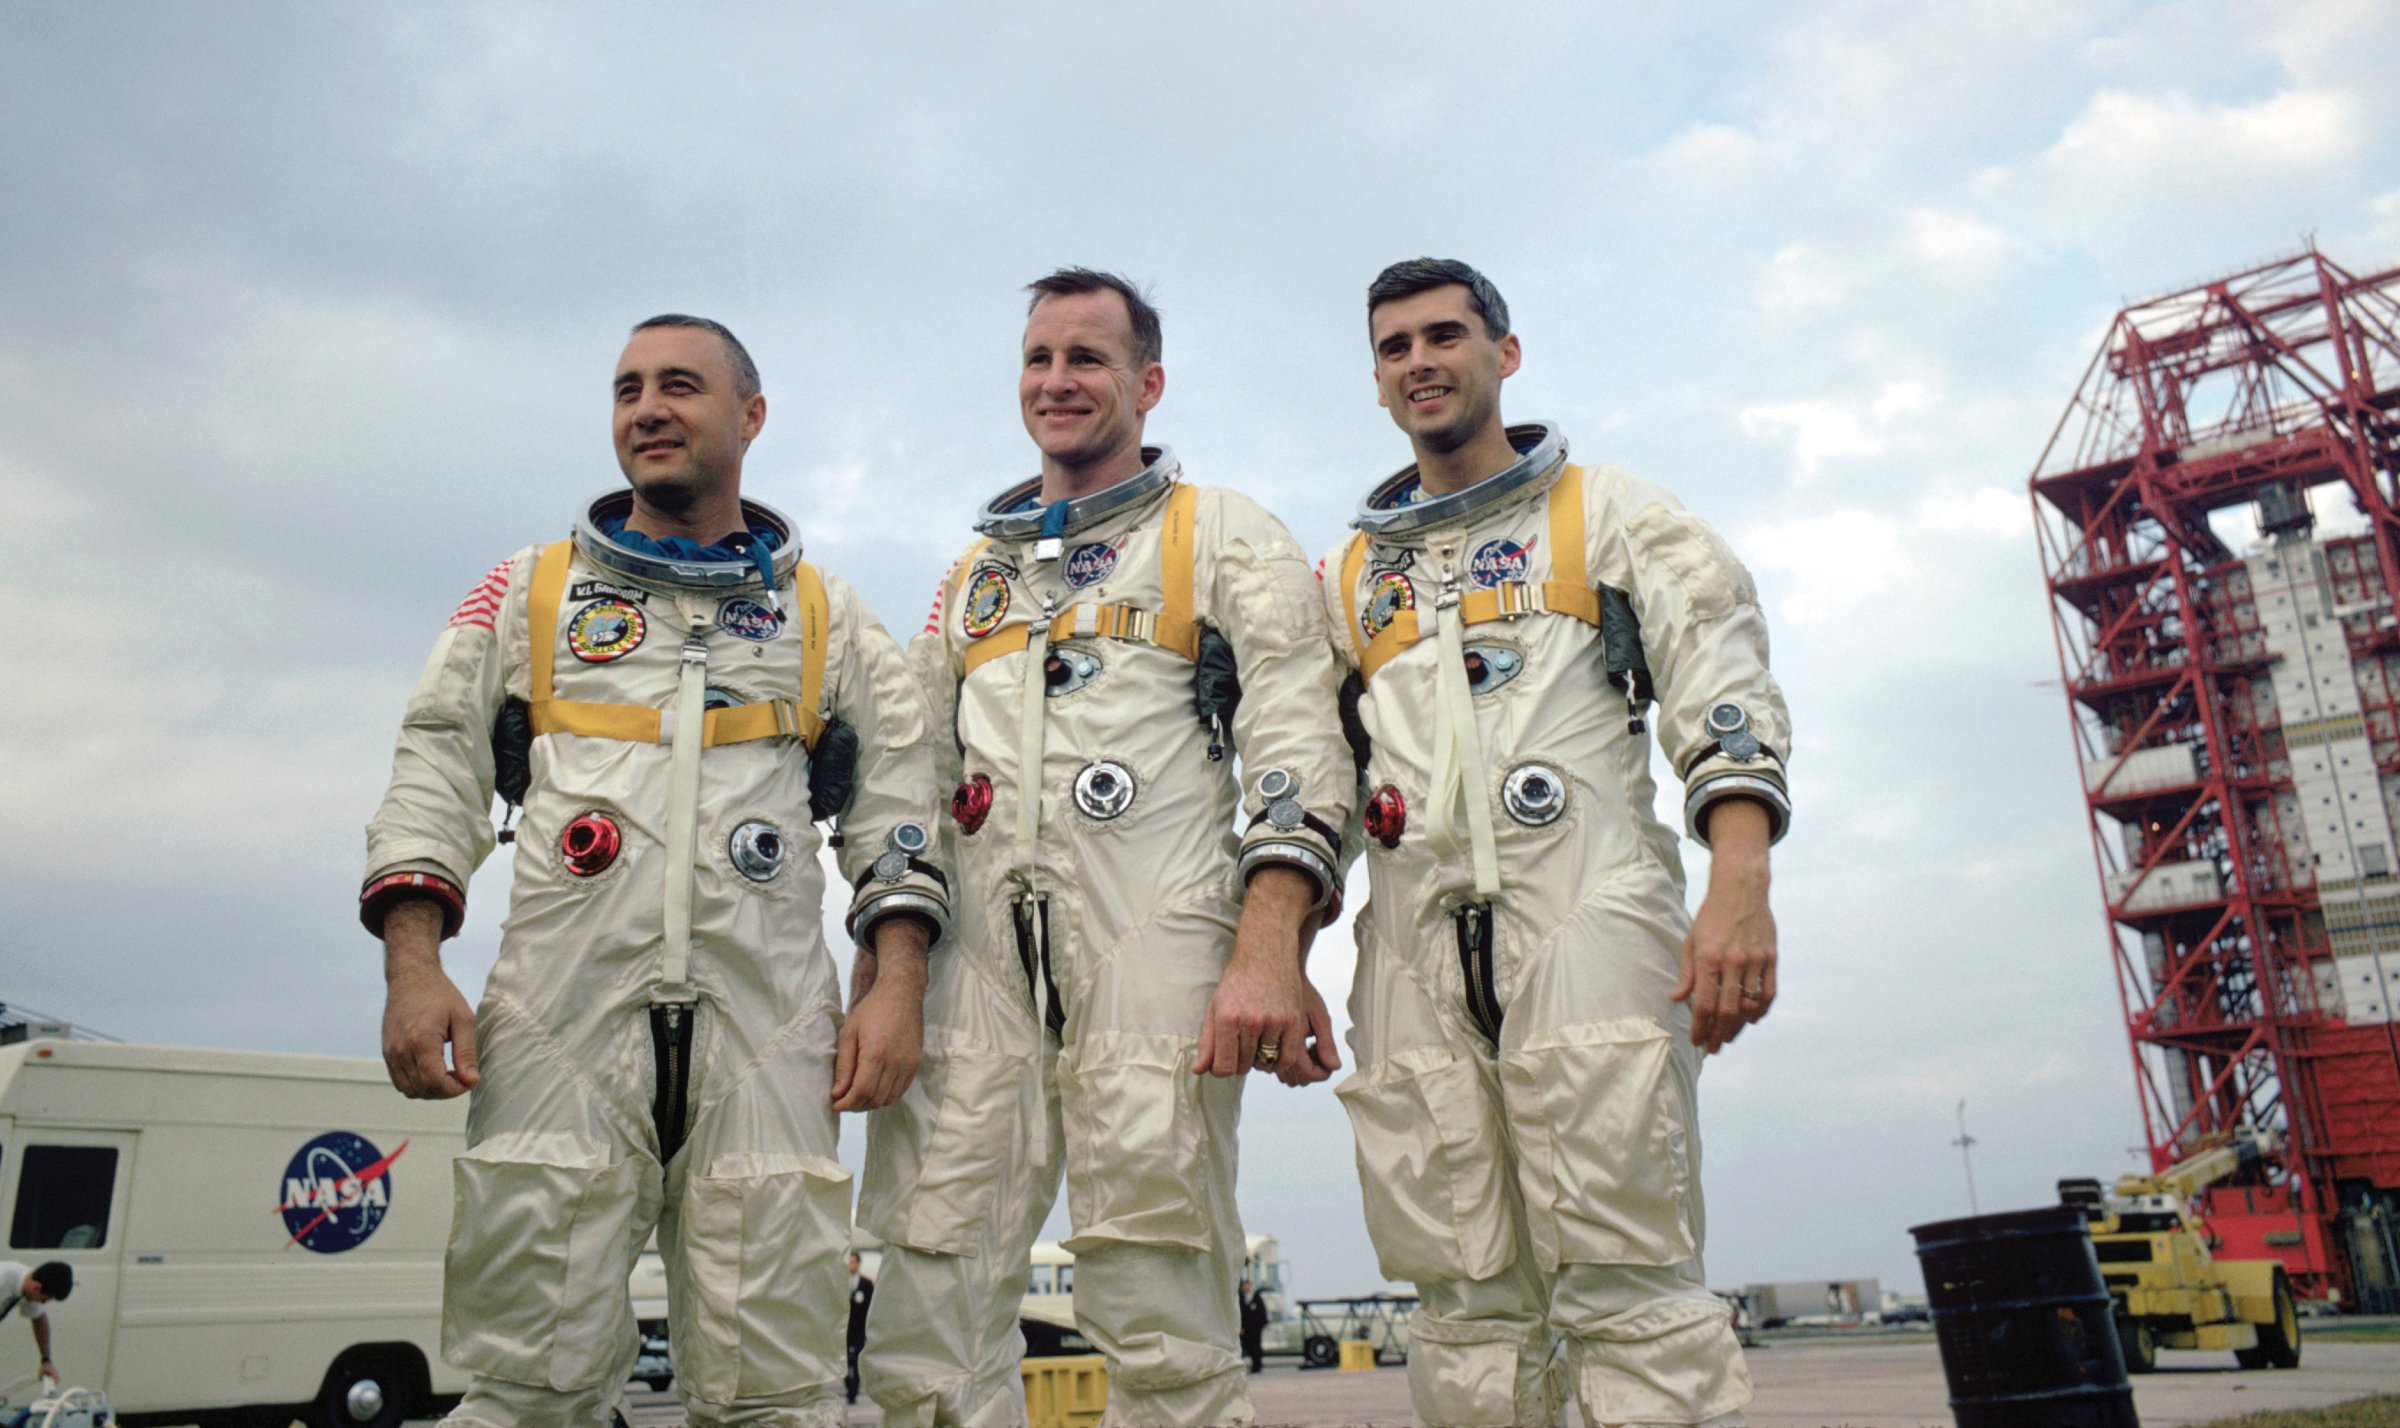 Crew Of Apollo I: Grissom, White, And Chaffee